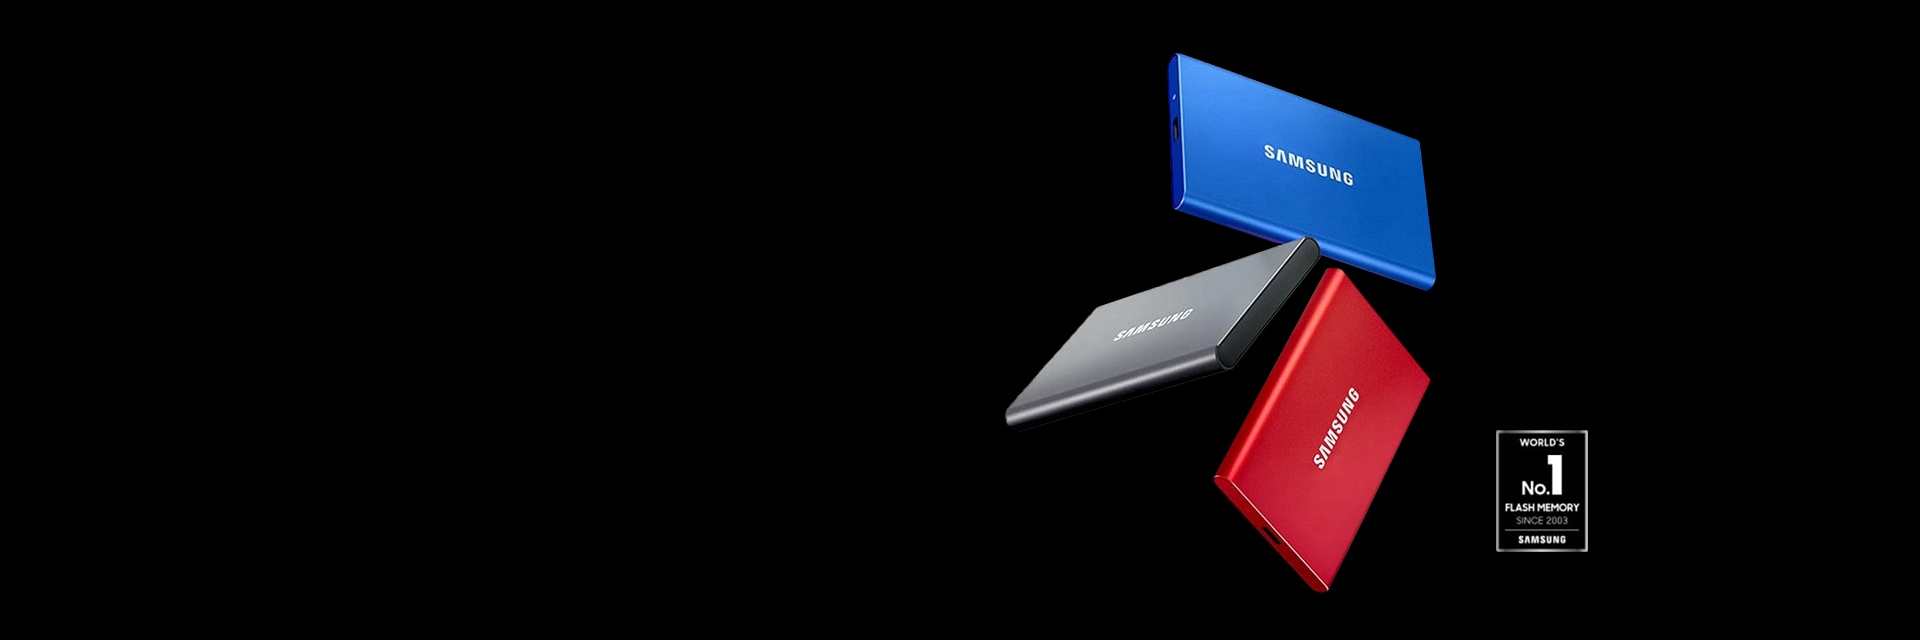 An illustrative image of Samsung Portable SSD T7 in black and silver and red color and seal of World's No. 1 Flash Memory Since 2003 - Samsung.